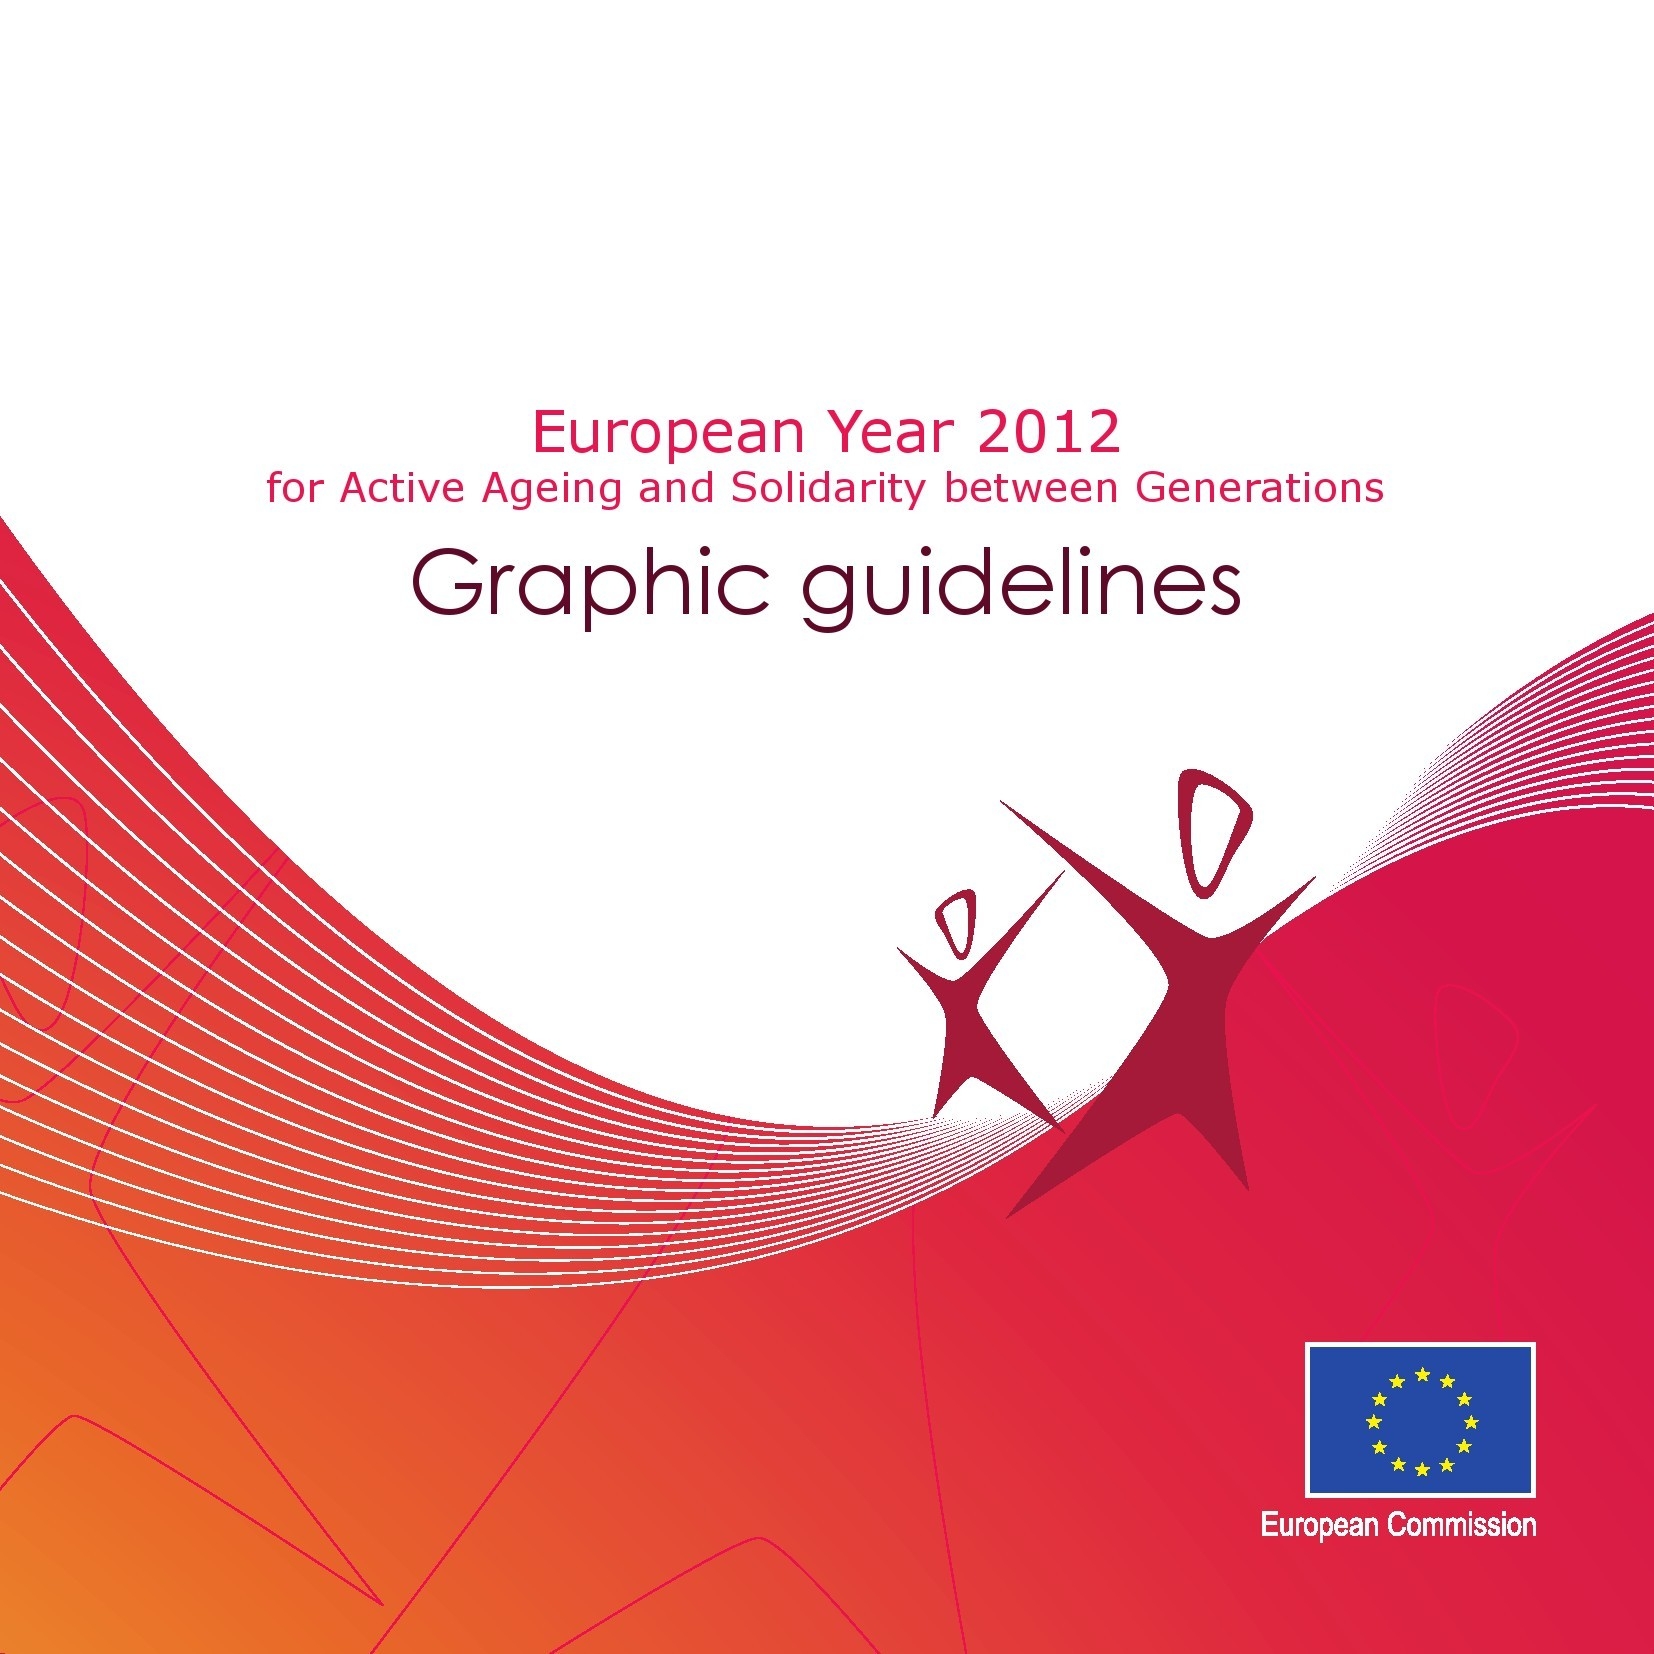 European Year 2012 Graphic Guidelines for Active Ageing and Solidarity between Generations